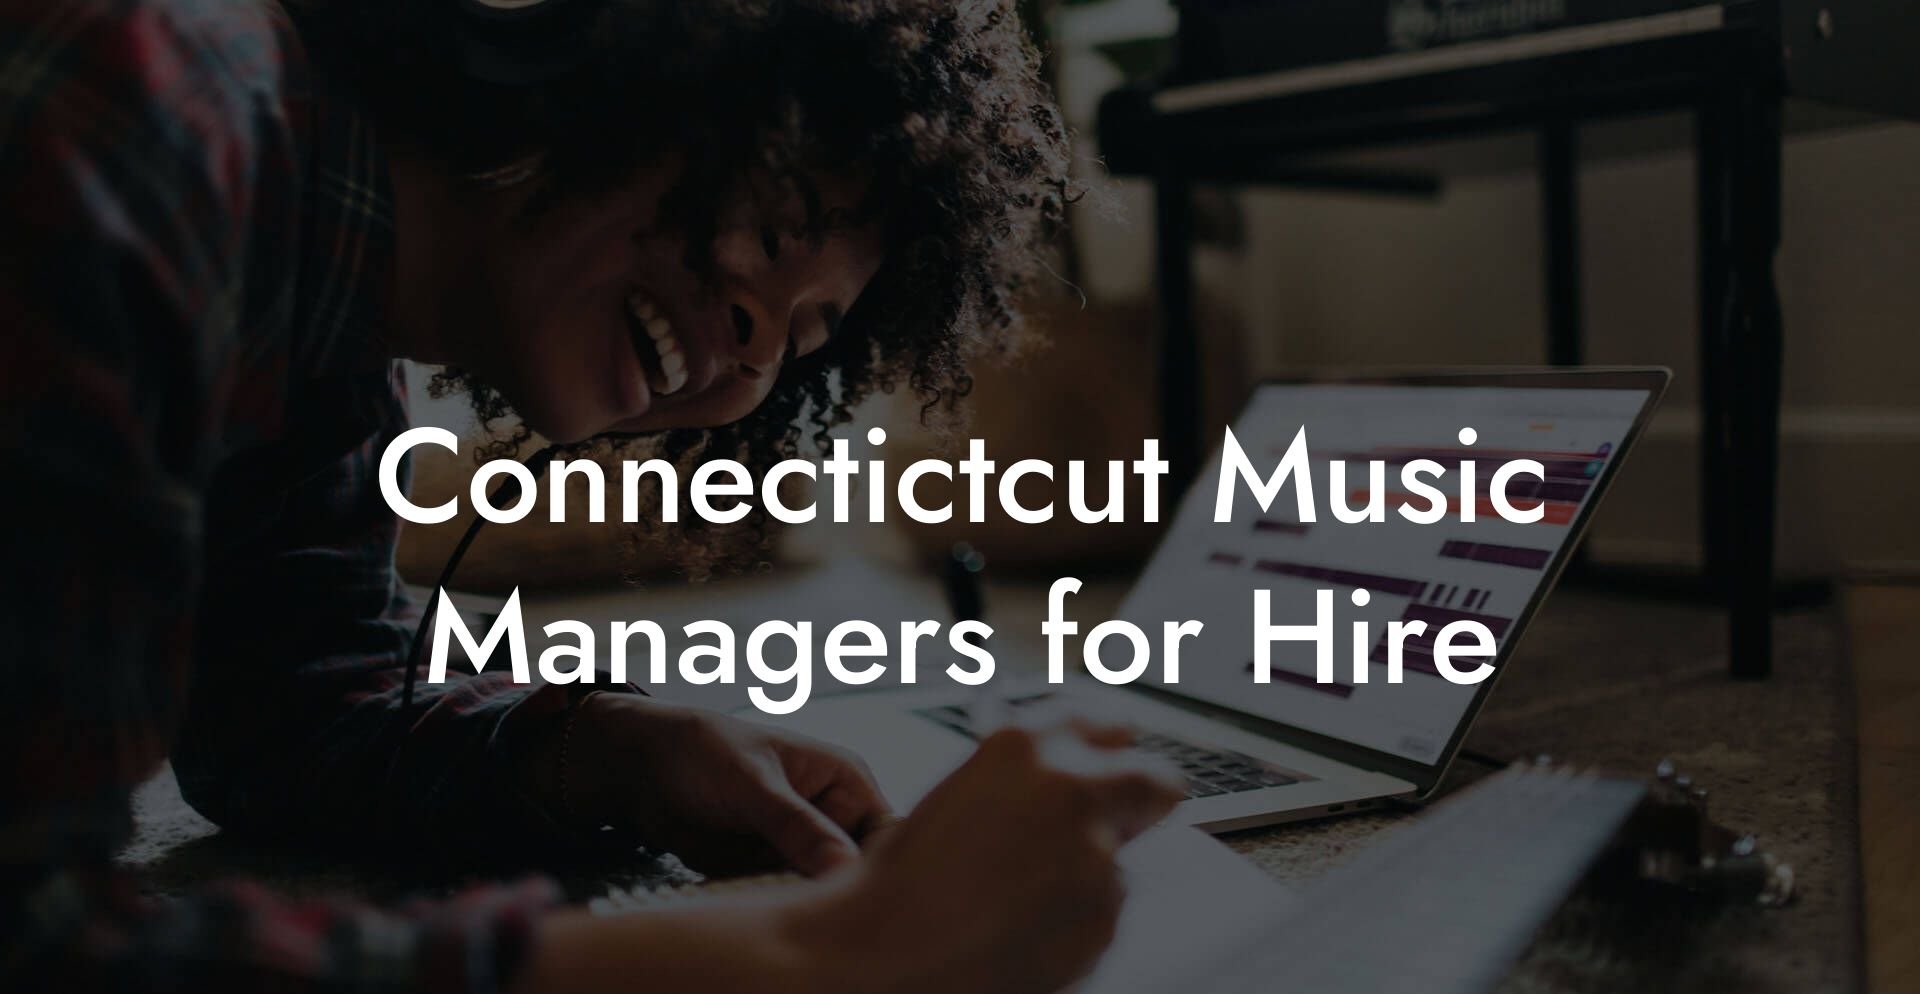 Connectictcut Music Managers for Hire